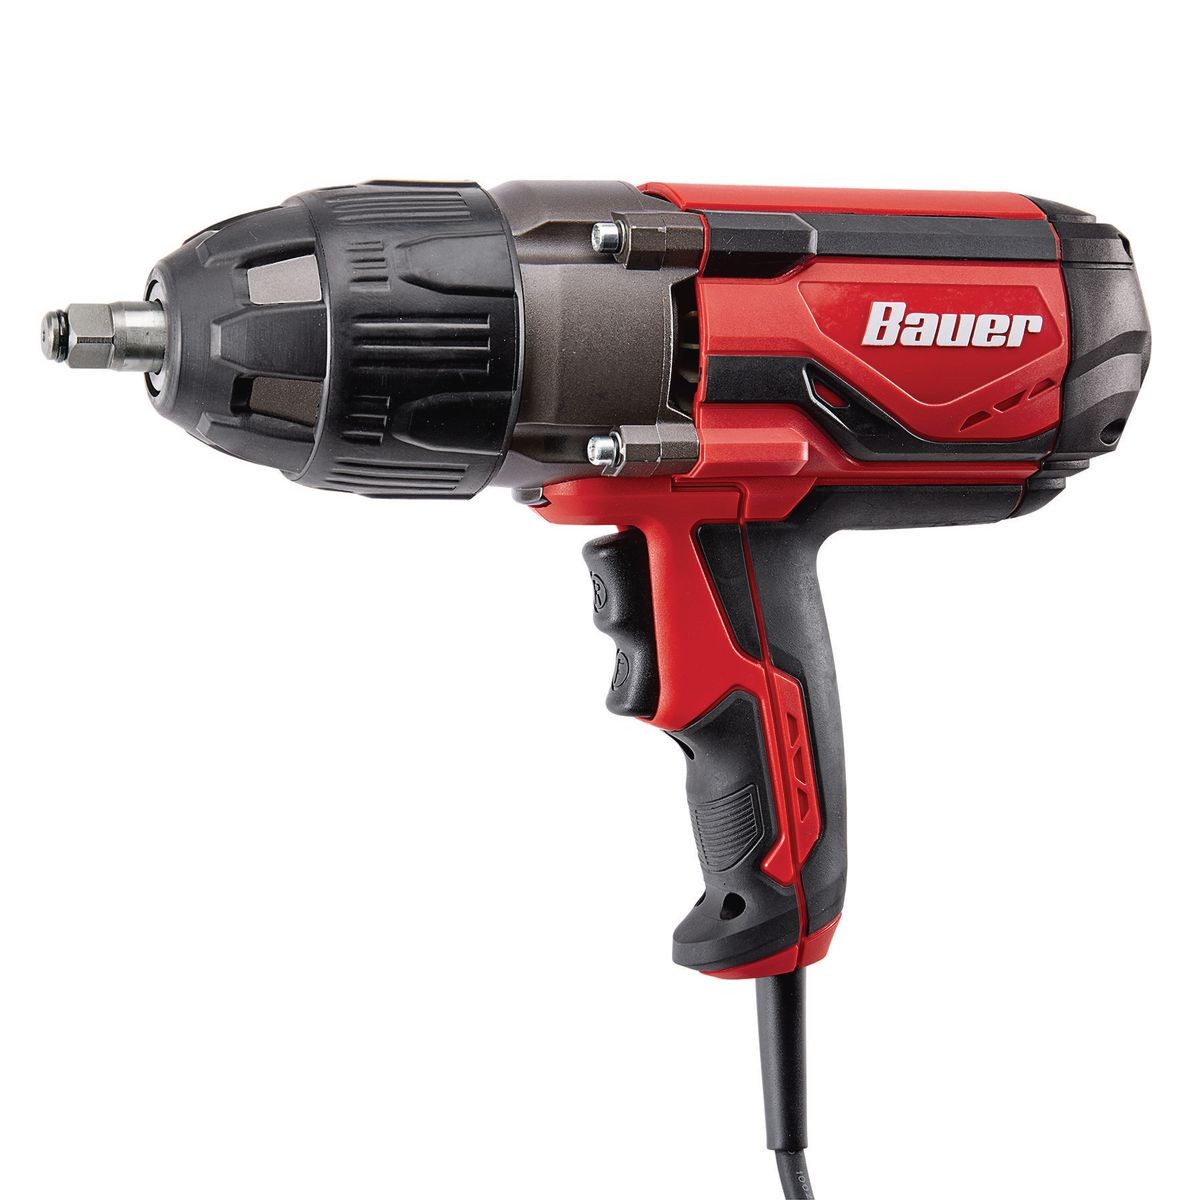 New Bauer Corded Tools At Harbor Freight - Tool Craze